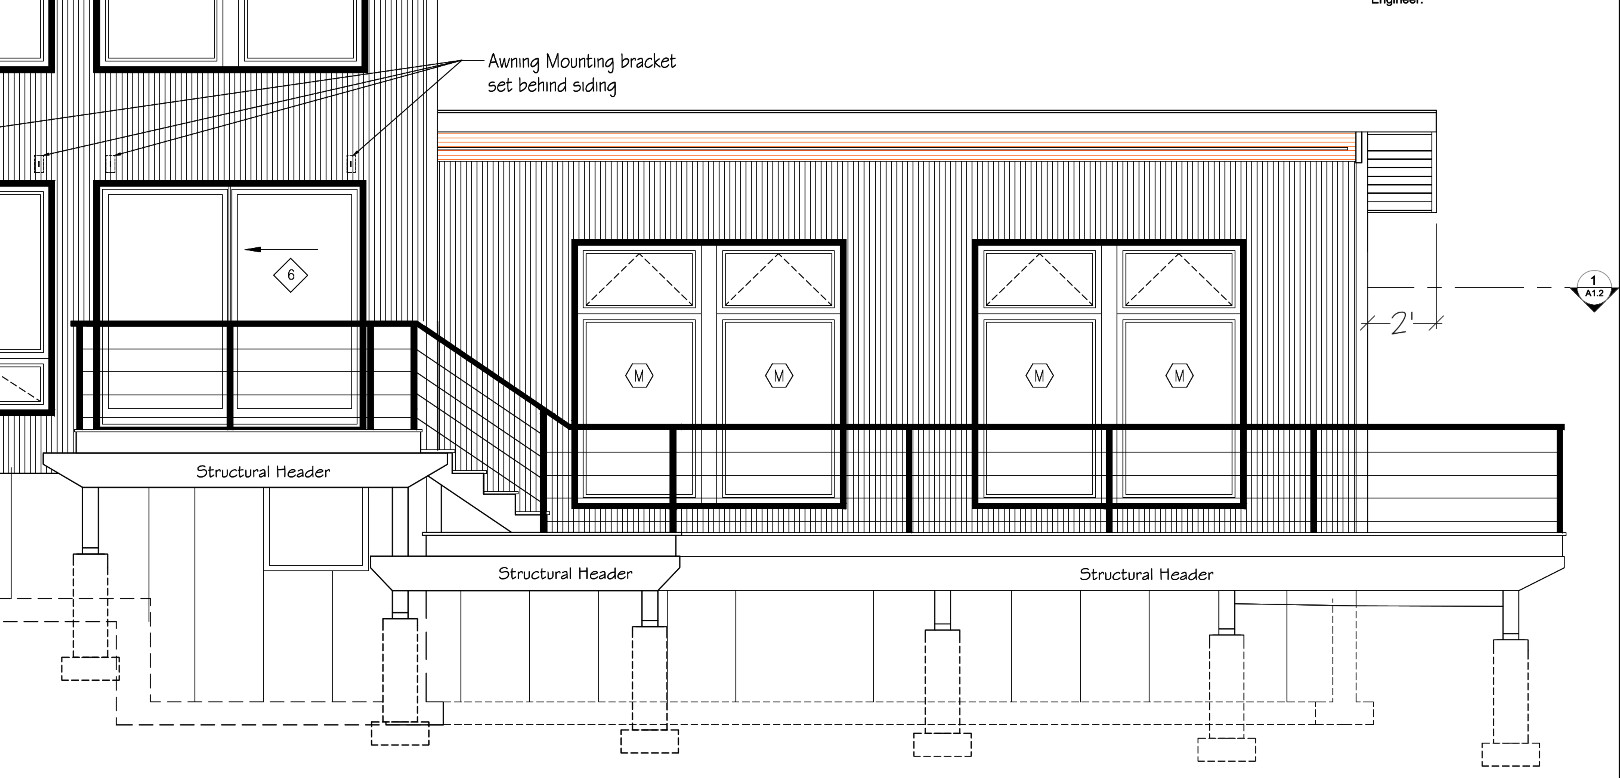 Deck design for modern home by mpdesigndrafting.com